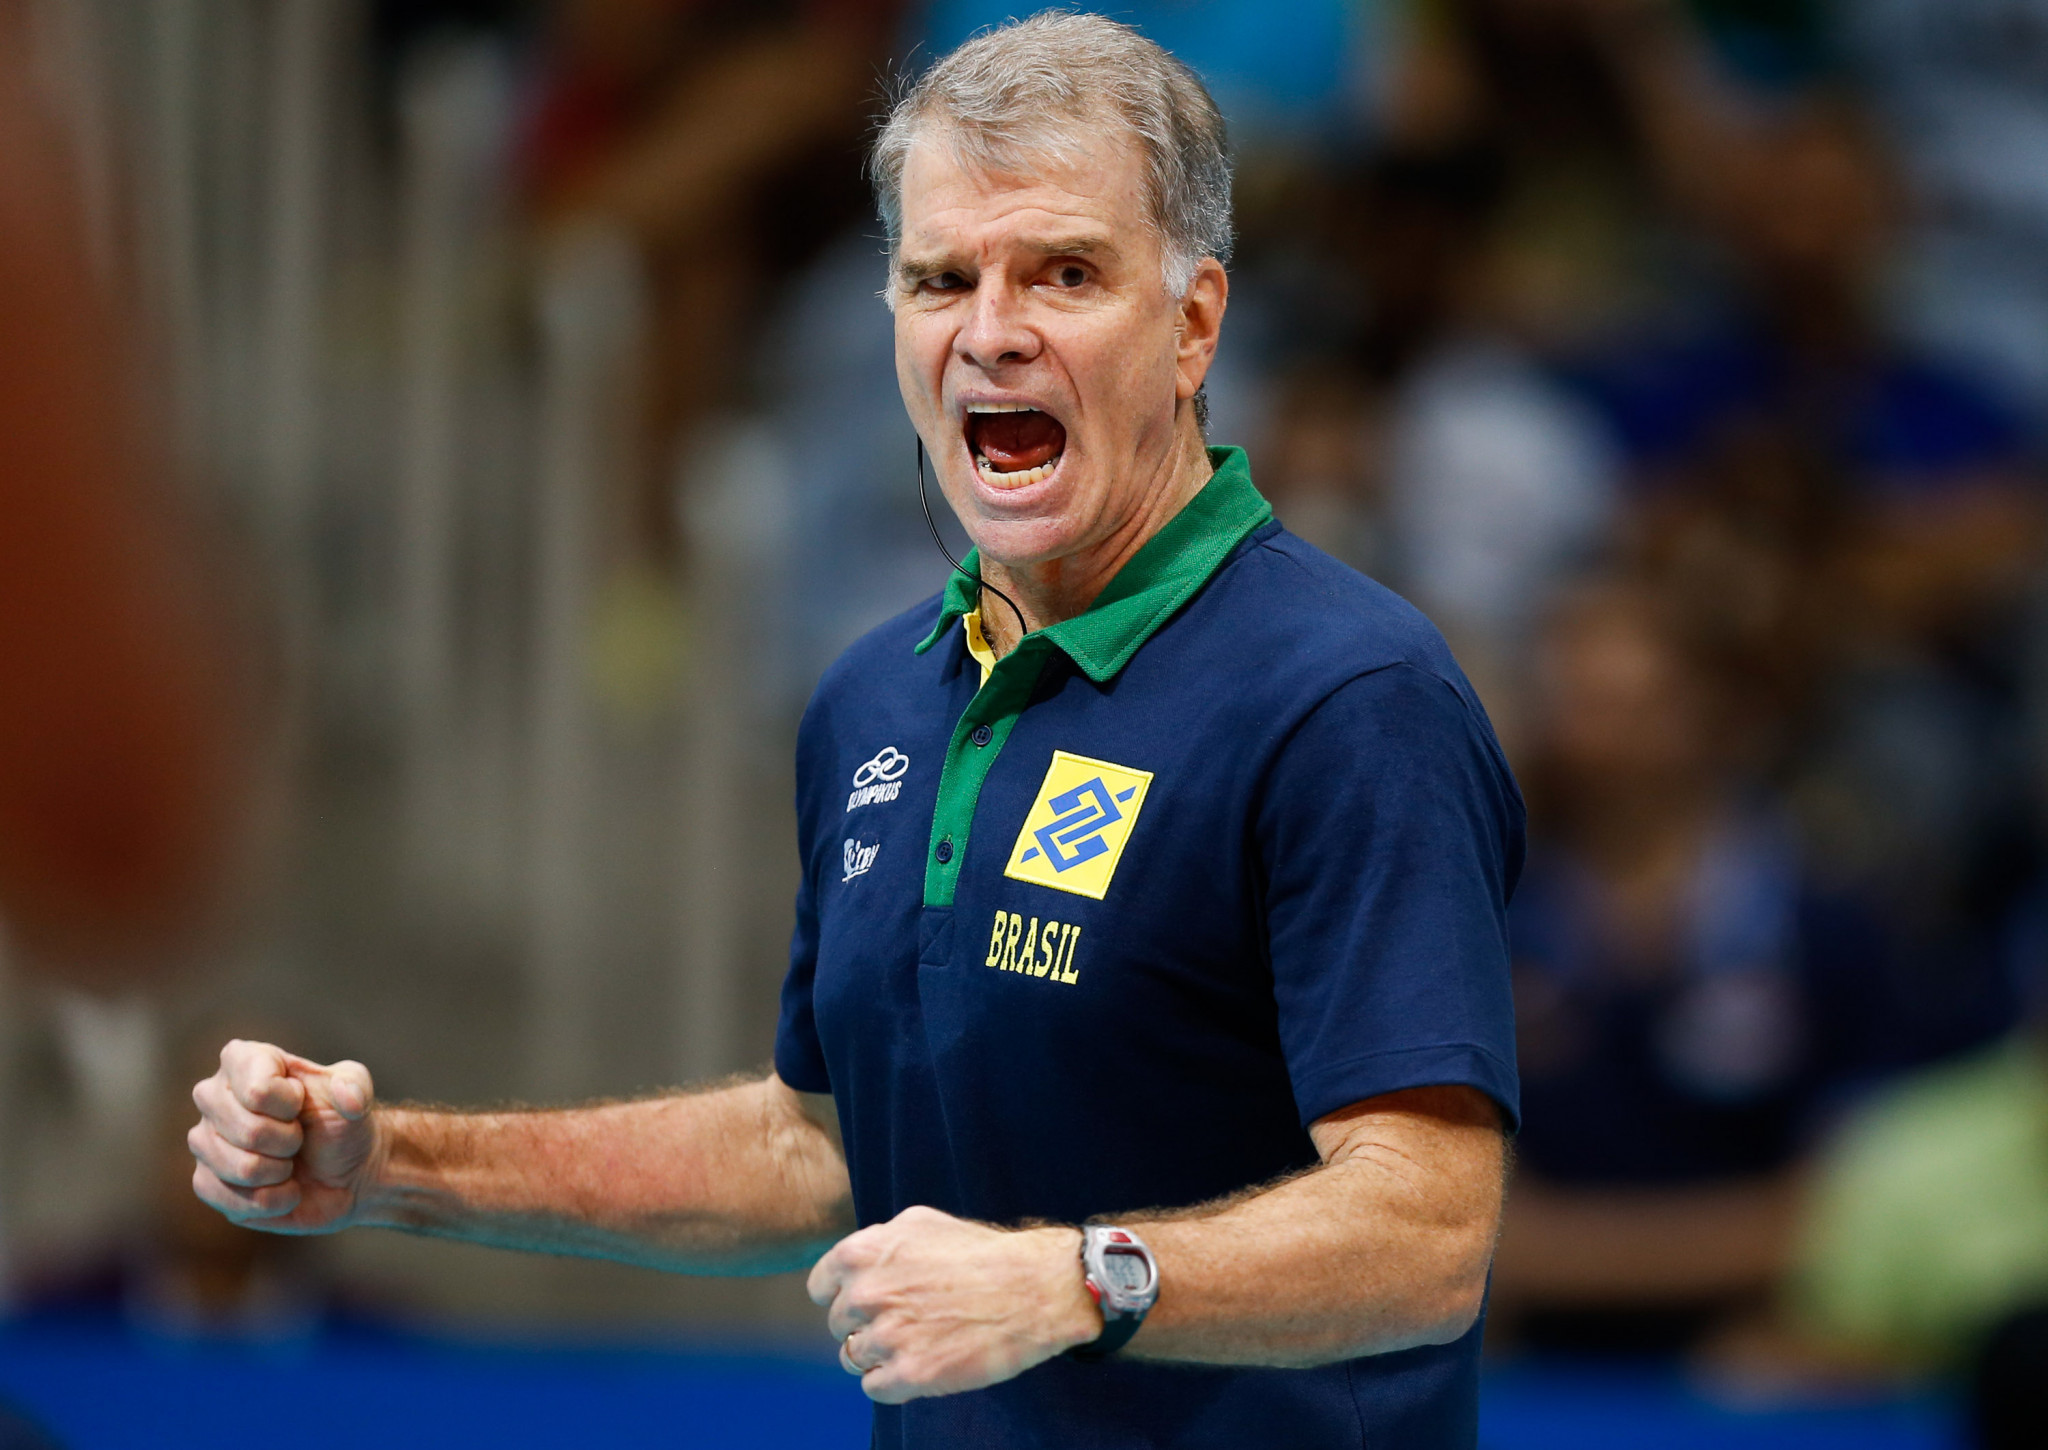 Bernardinho named as coach of French men's volleyball team with goal of gold medal at Paris 2024